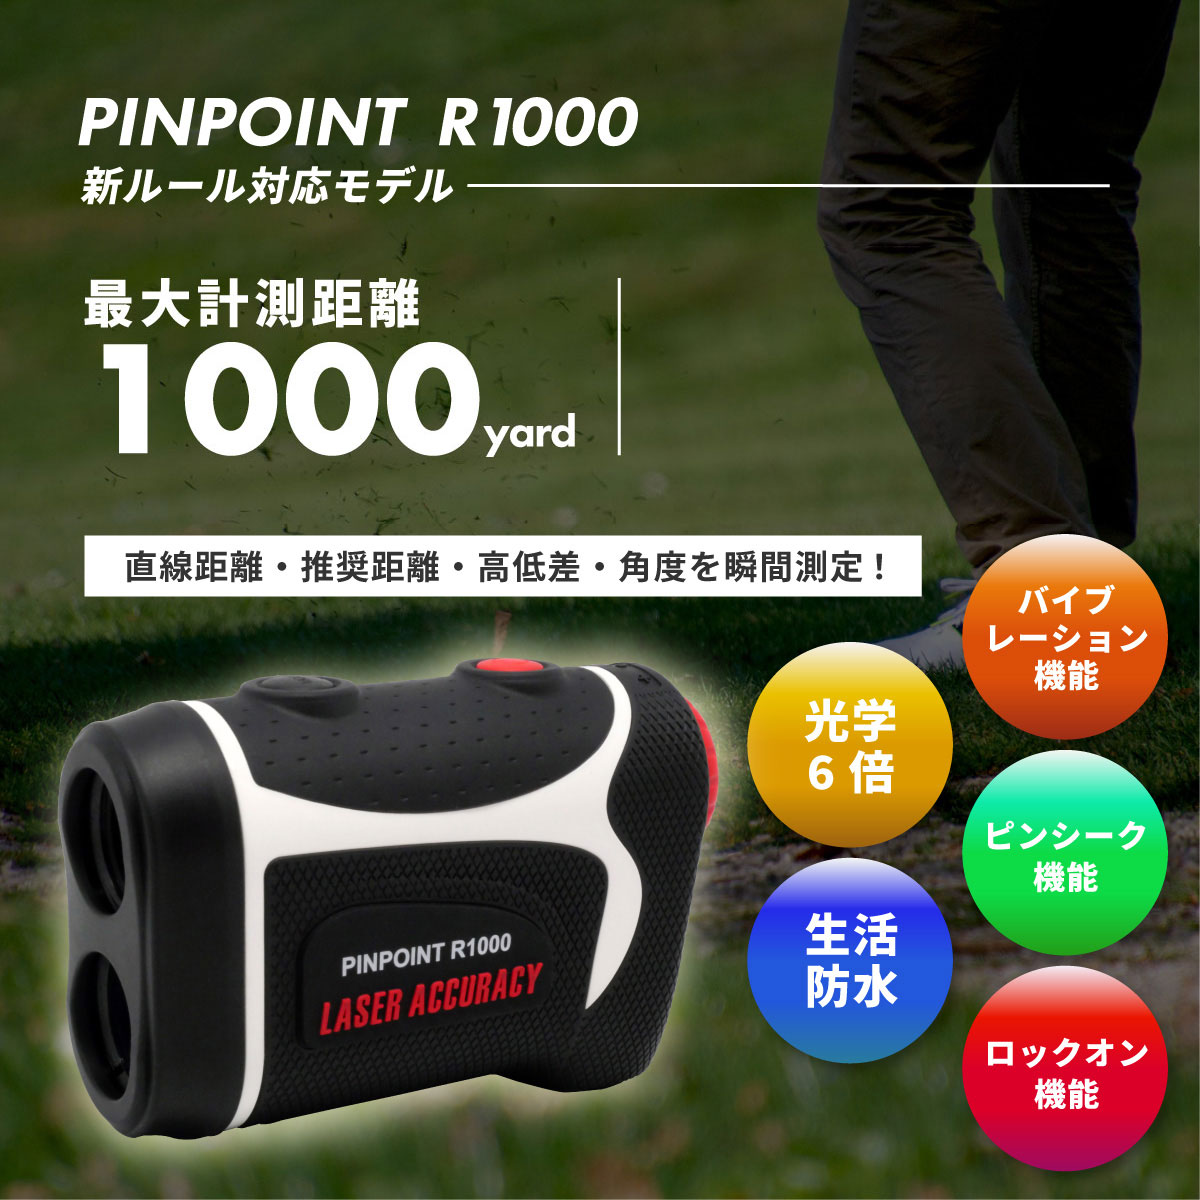 PINPOINT R1000　商品情報